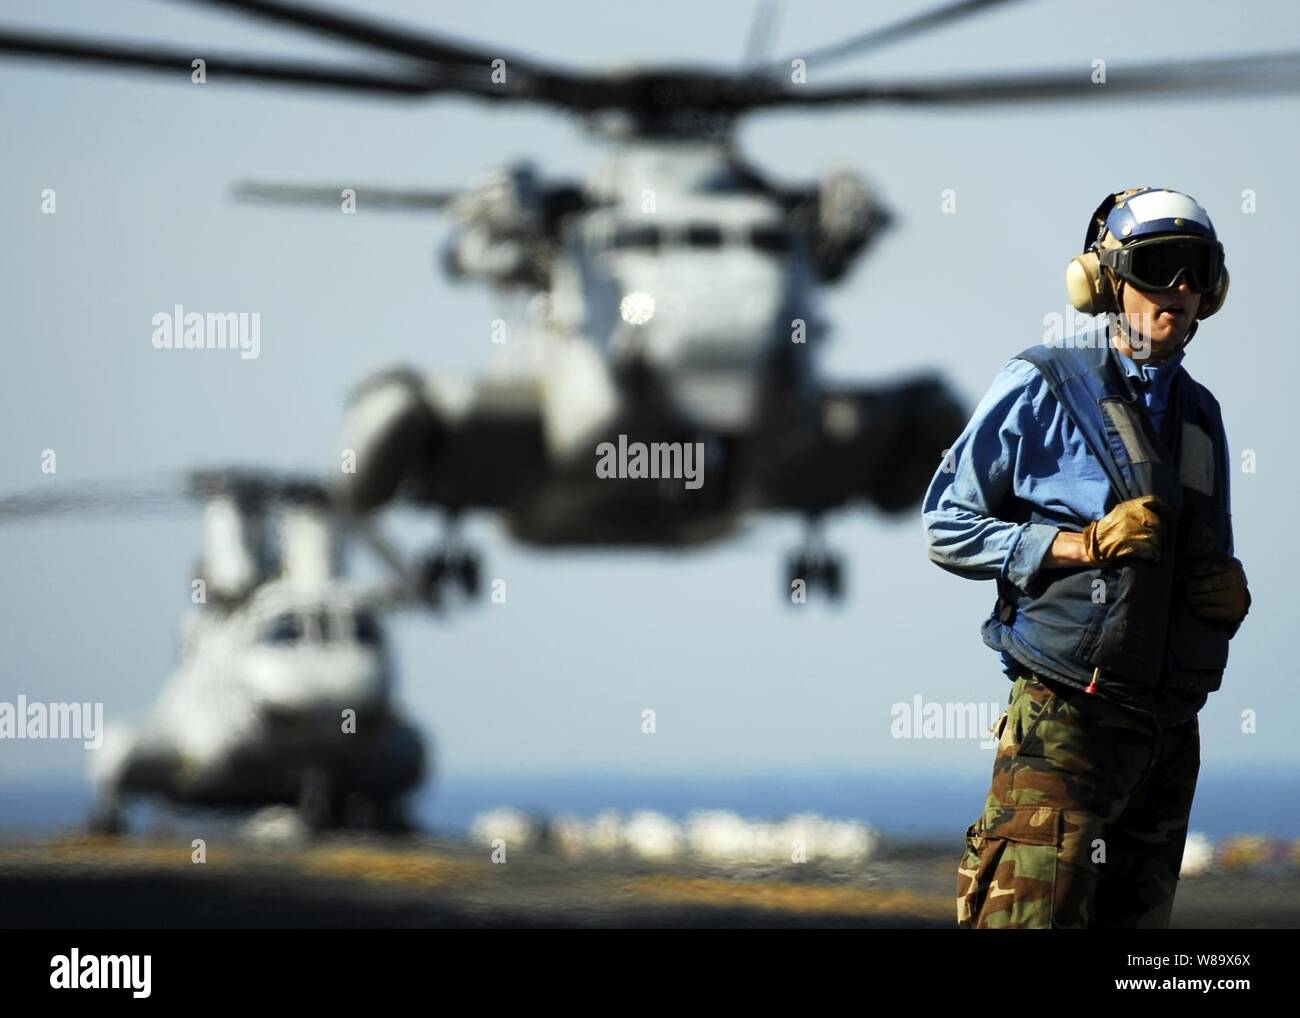 U.S. Navy Airman Patrick Neimeyer stands on the flight deck of the amphibious assault ship USS Essex (LHD 2) as a CH-53E Sea Stallion helicopter lands during exercise Cobra Gold 09 in the Gulf of Thailand on Feb. 15, 2009.  Cobra Gold is an annual joint-combined exercise conducted by military forces of the United States and Thailand to strengthen ties and prepare for possible contingencies in the region. Stock Photo